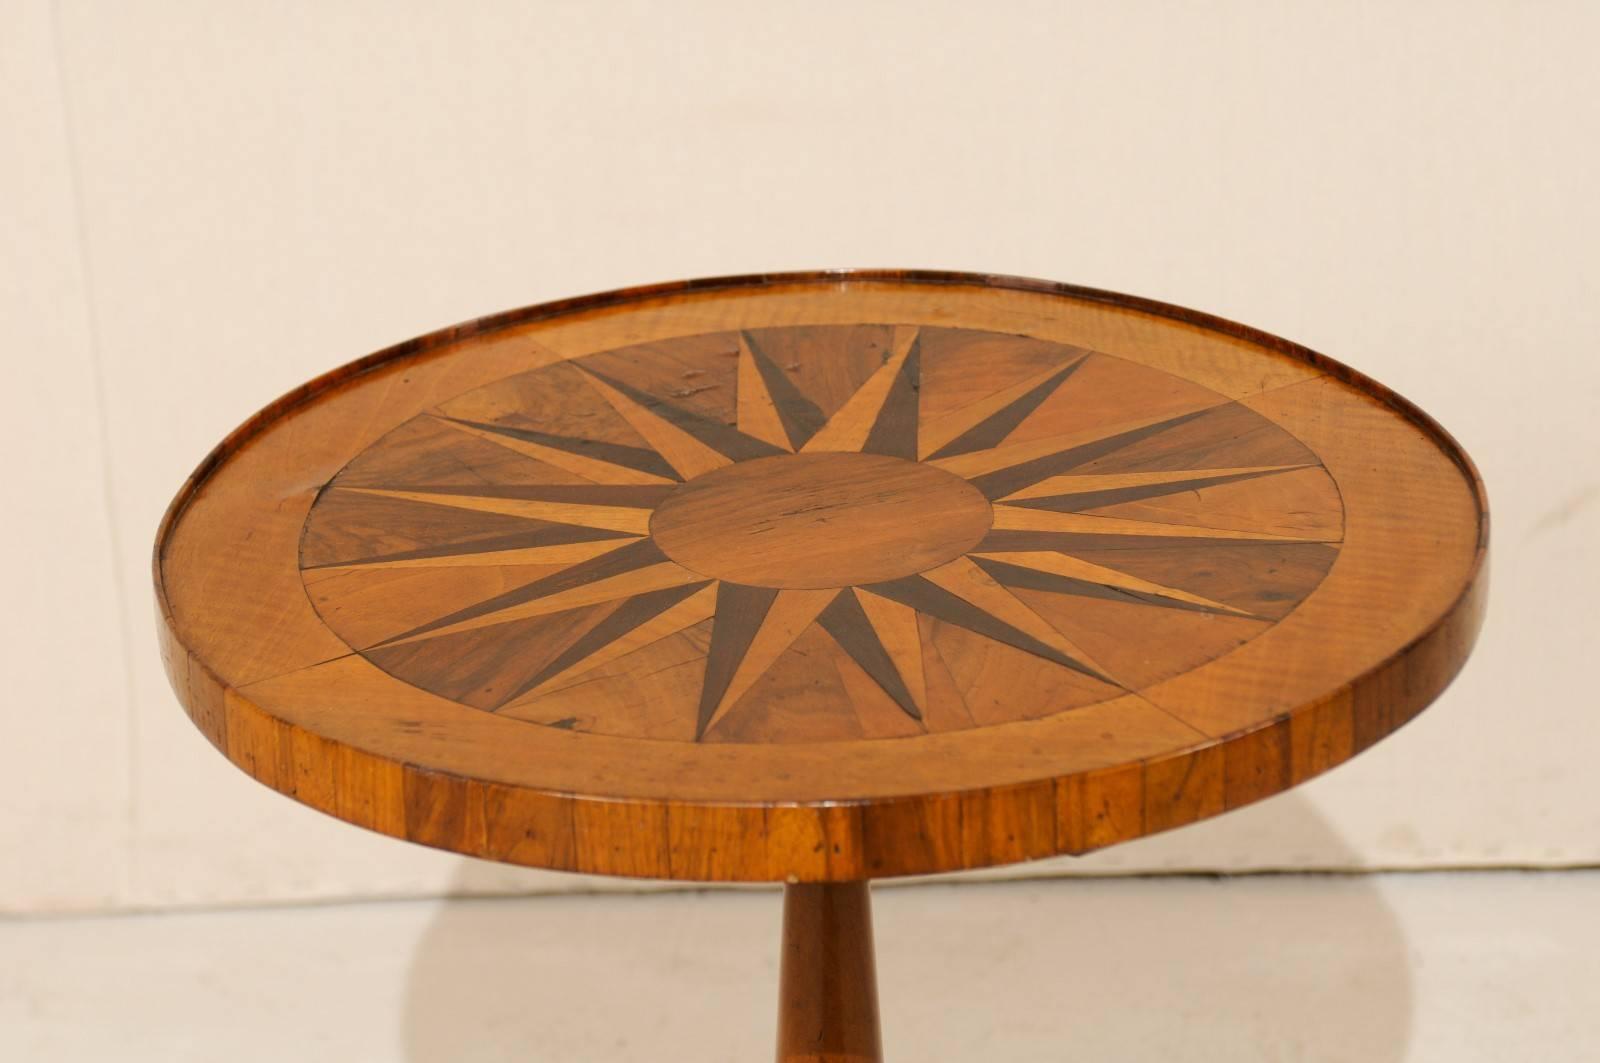 Wood Italian 19th Century Round Fruitwood Pedestal Table with Compass Star Inlay